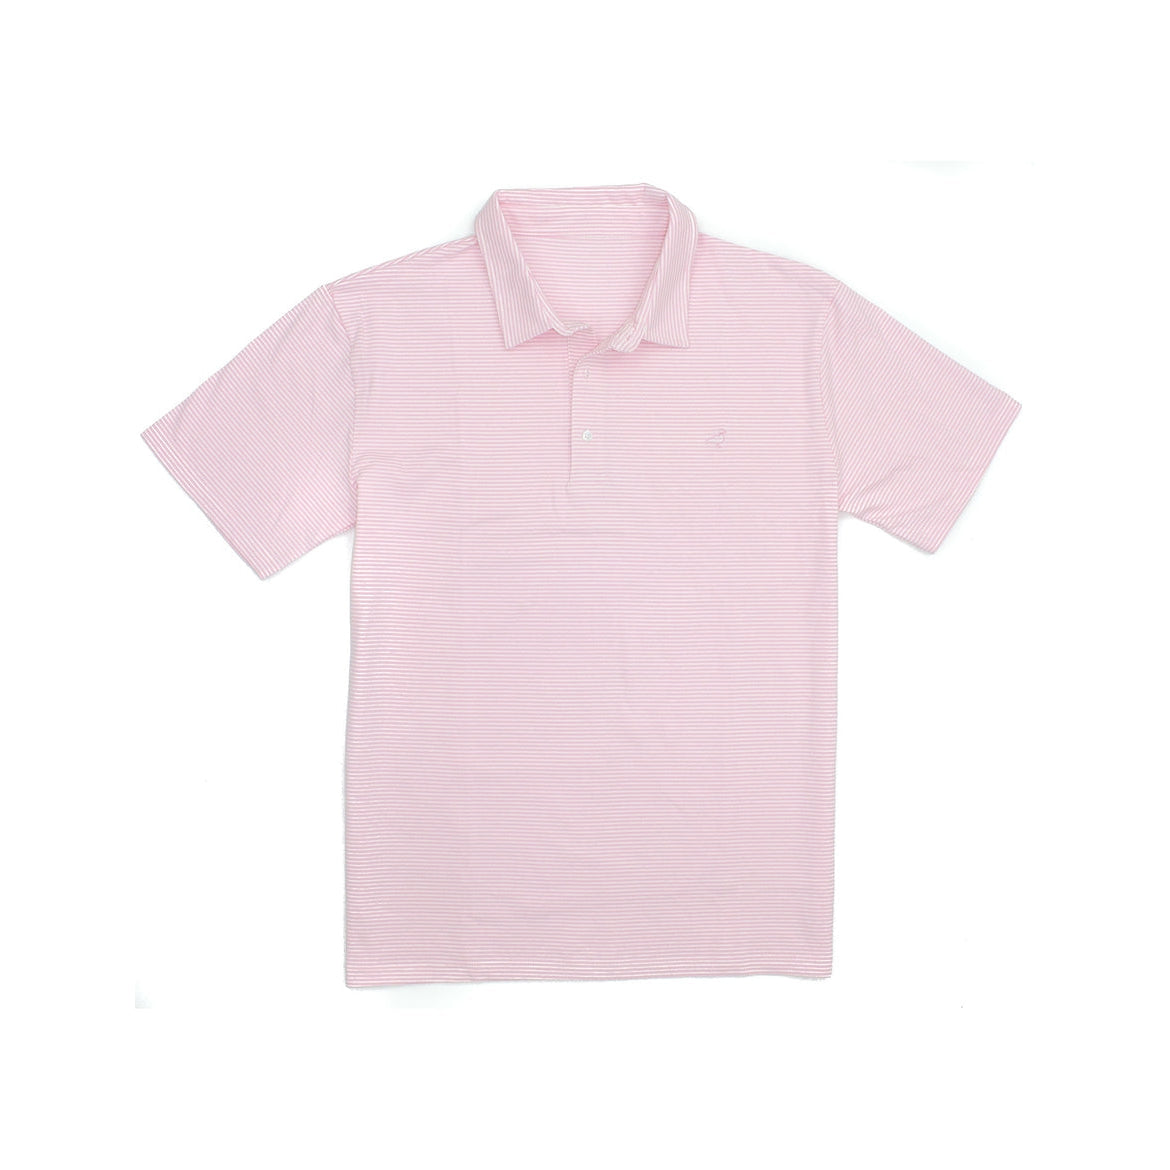 Jackson Polo in Light Pink Stripe - Properly Tied | The Perfect Pair-M Top-Graceful & Chic Boutique, Family Clothing Store in Waxahachie, Texas